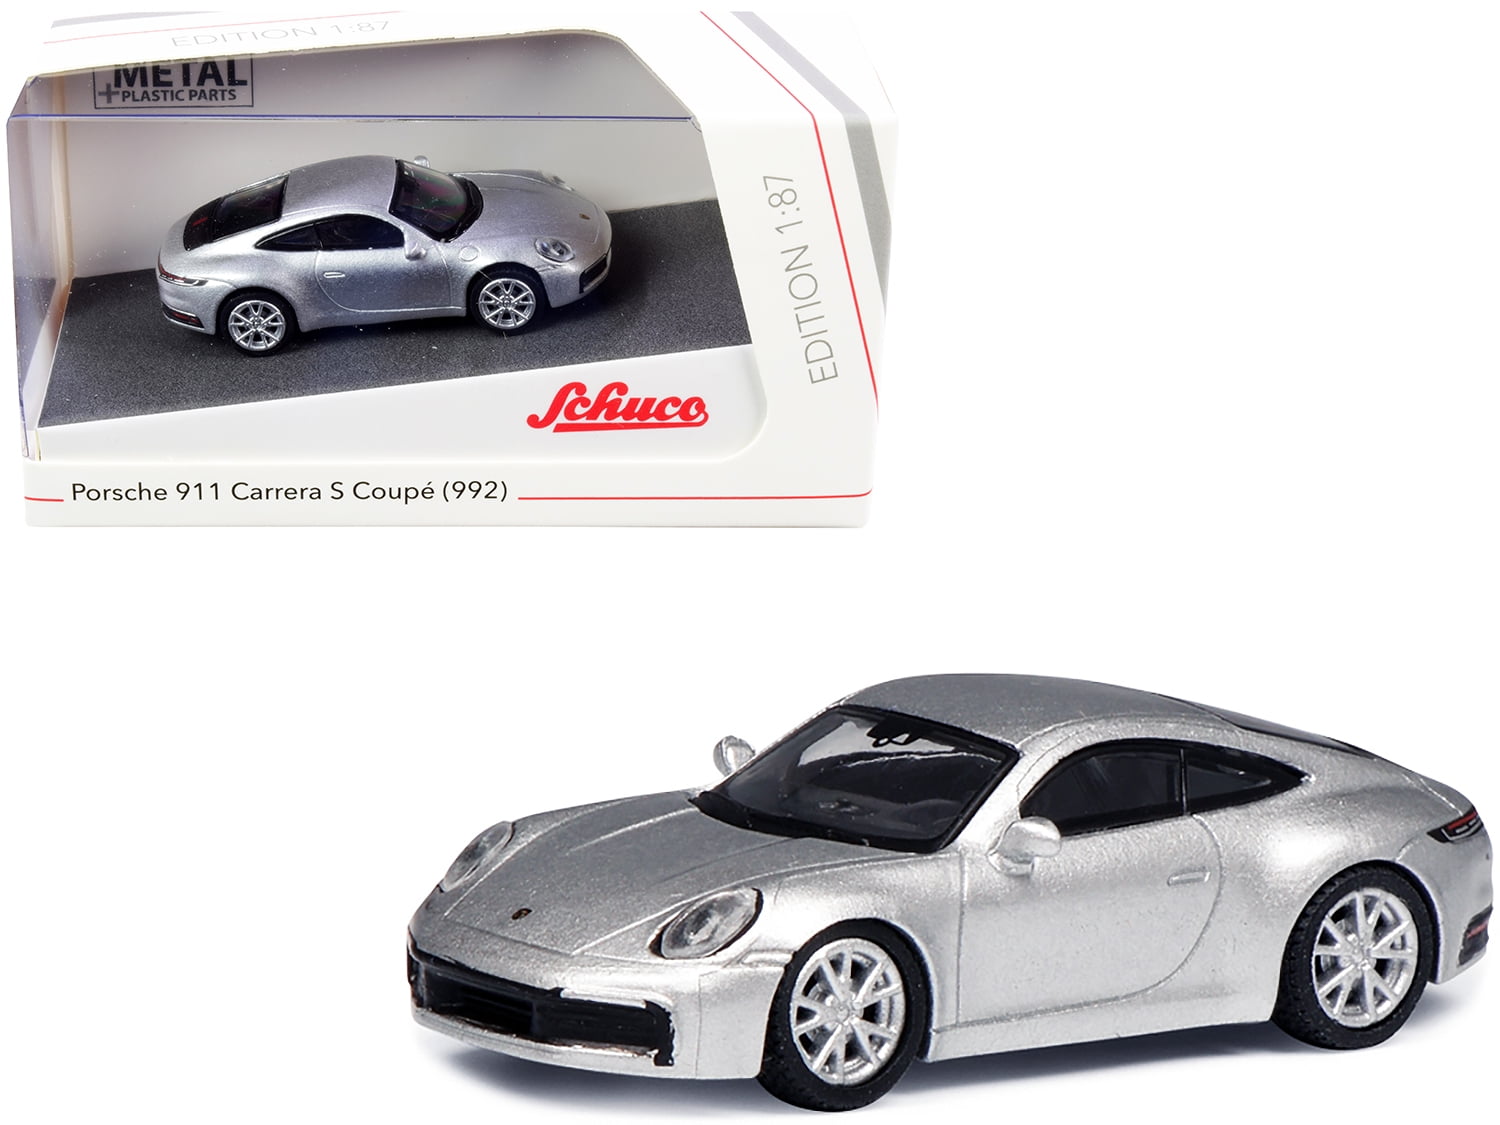 Porsche 911 Carrera S Coupe 1:24 Scale Model Car Diecast Toy Vehicle Gift Black